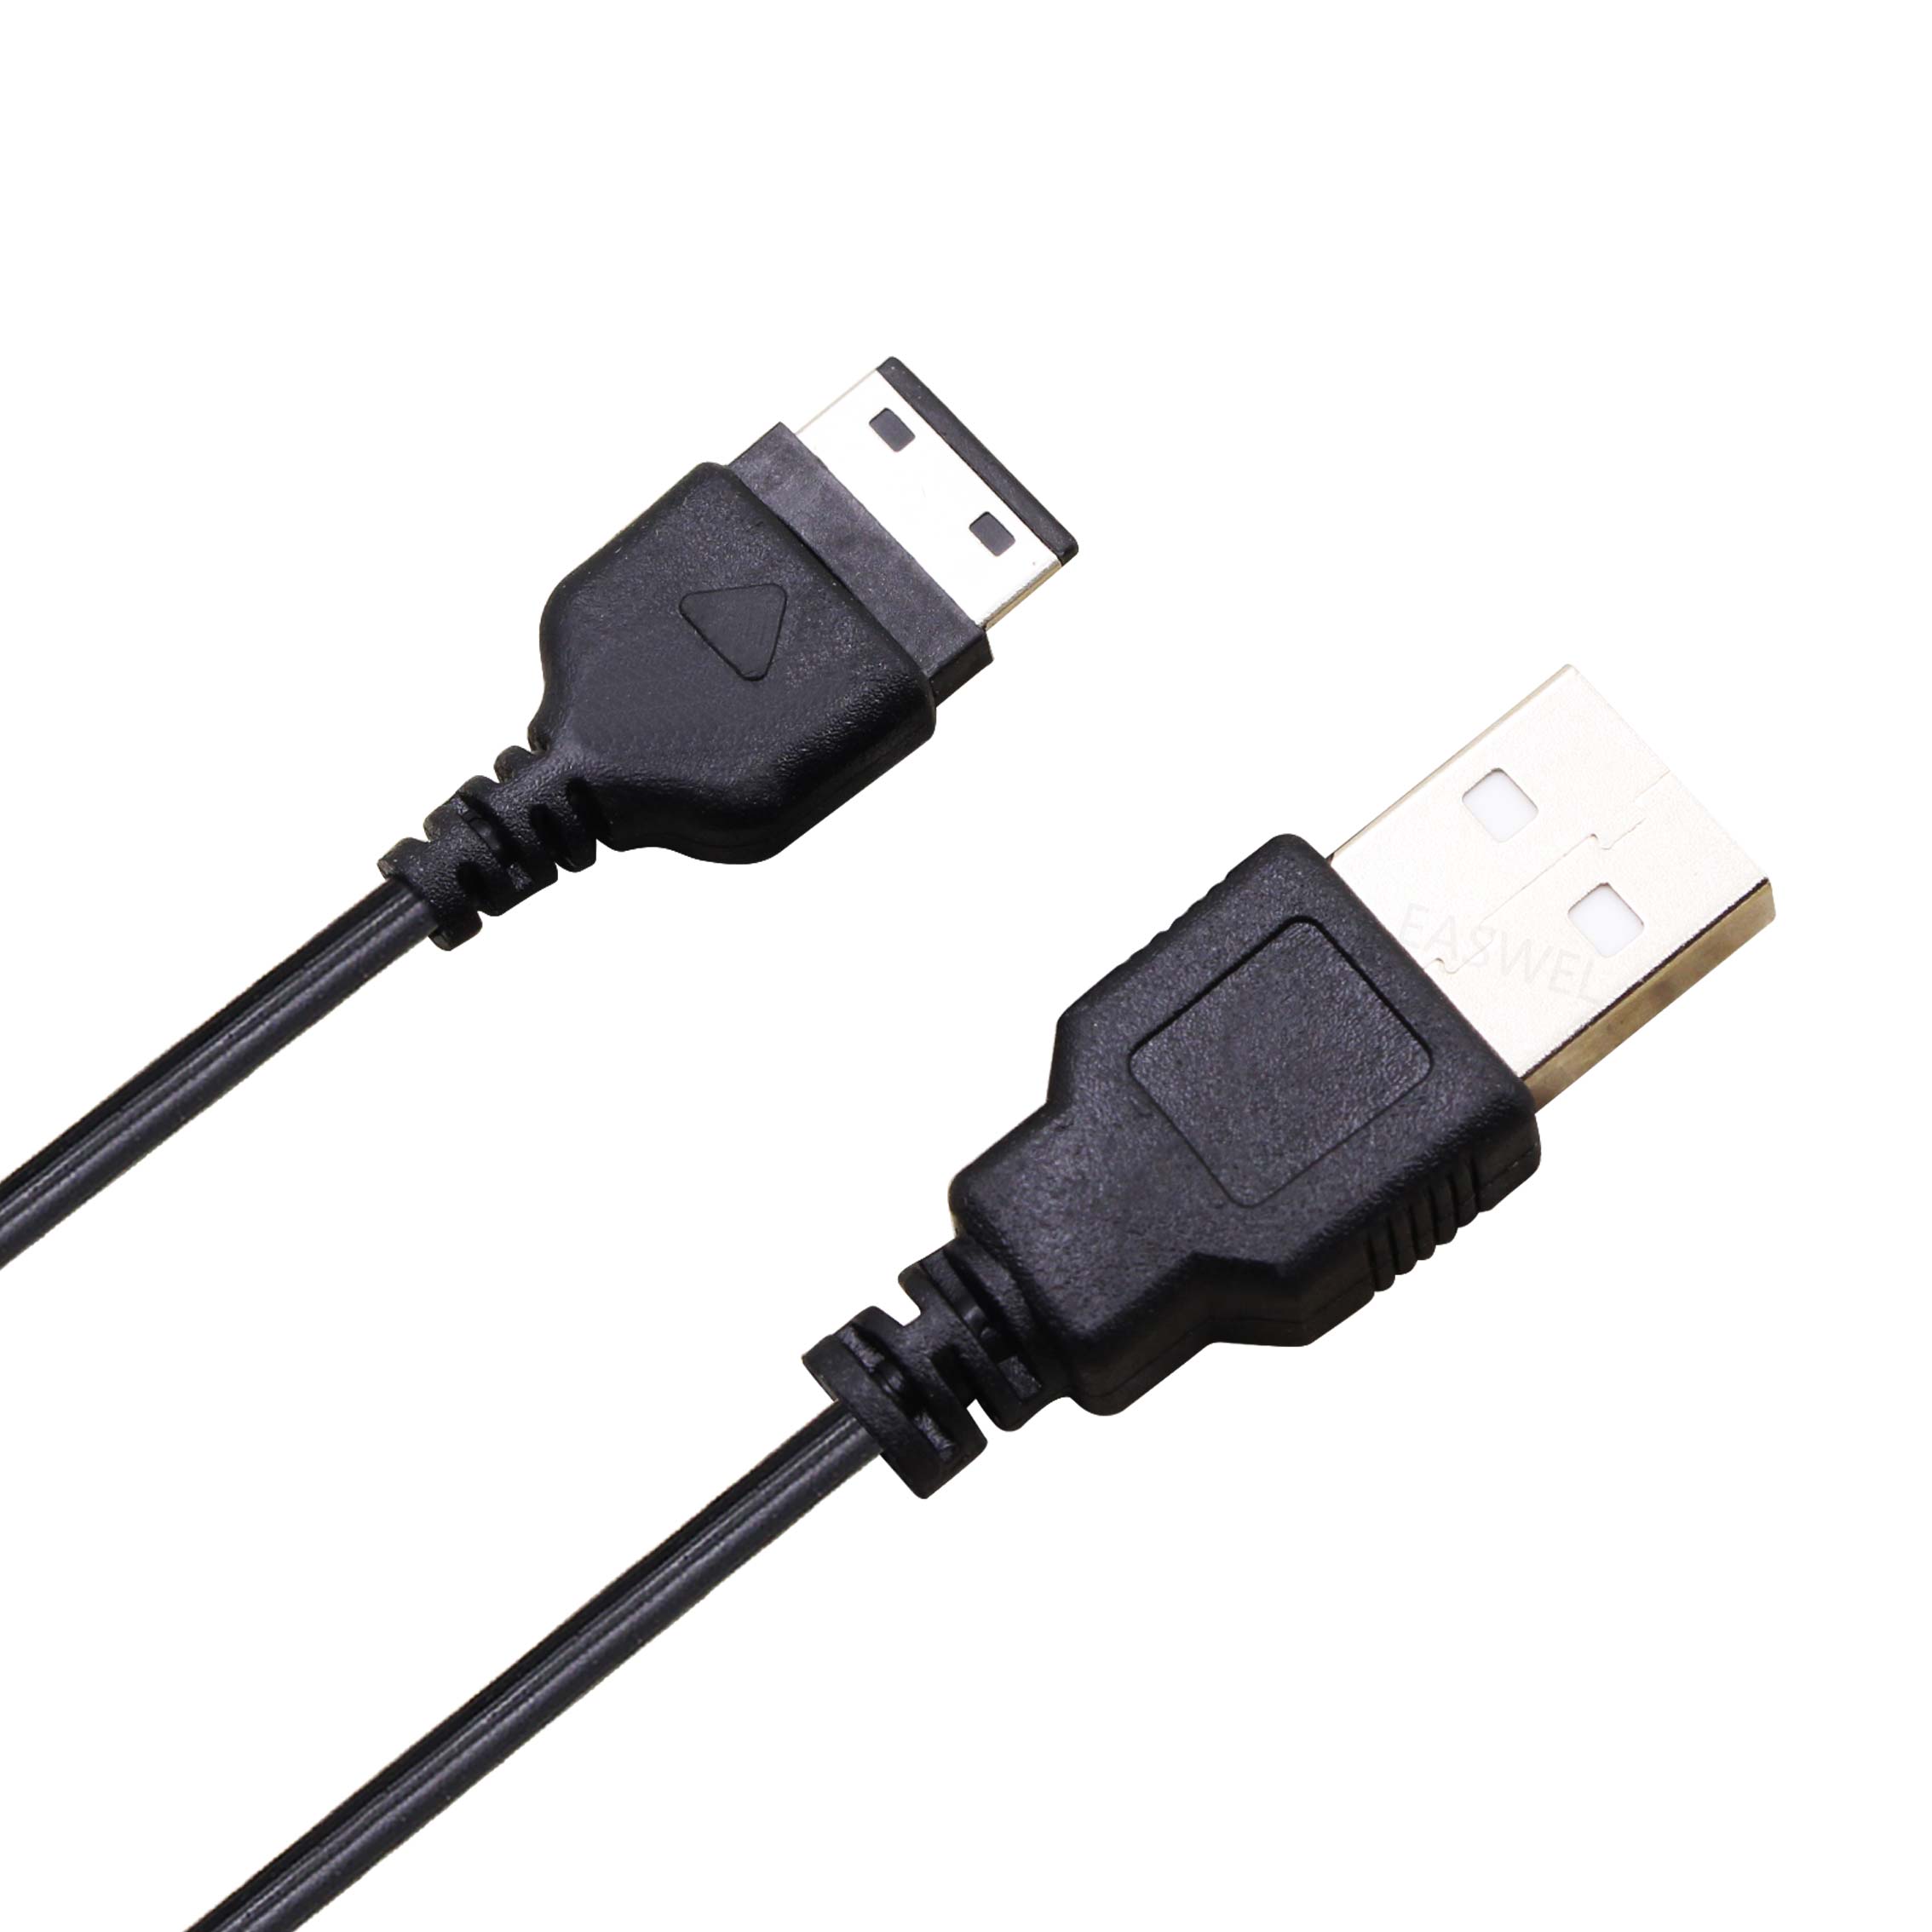 USB Charger Data Cable Koord voor Samsung gt-e1070 gt-e1080 gt-e1080i sgh-a117 sgh-a137 sgh-a167 sgh-a177 sch-u706 sch-u750